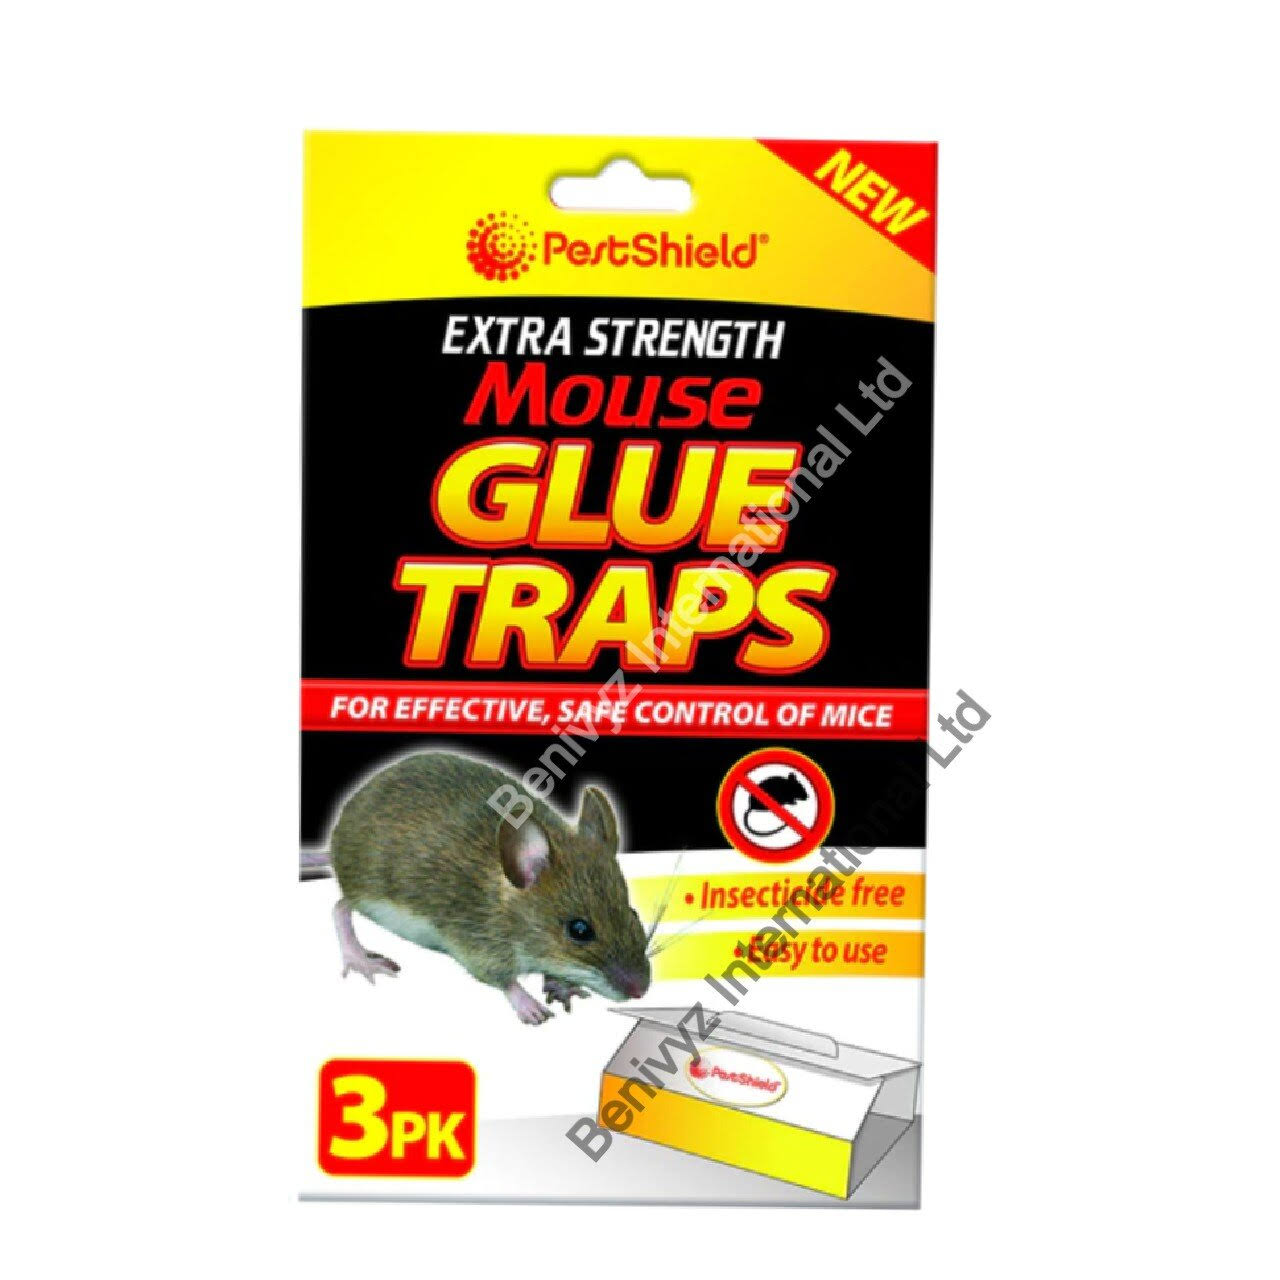 Pestshield Extra Strength Glue Mouse Trap